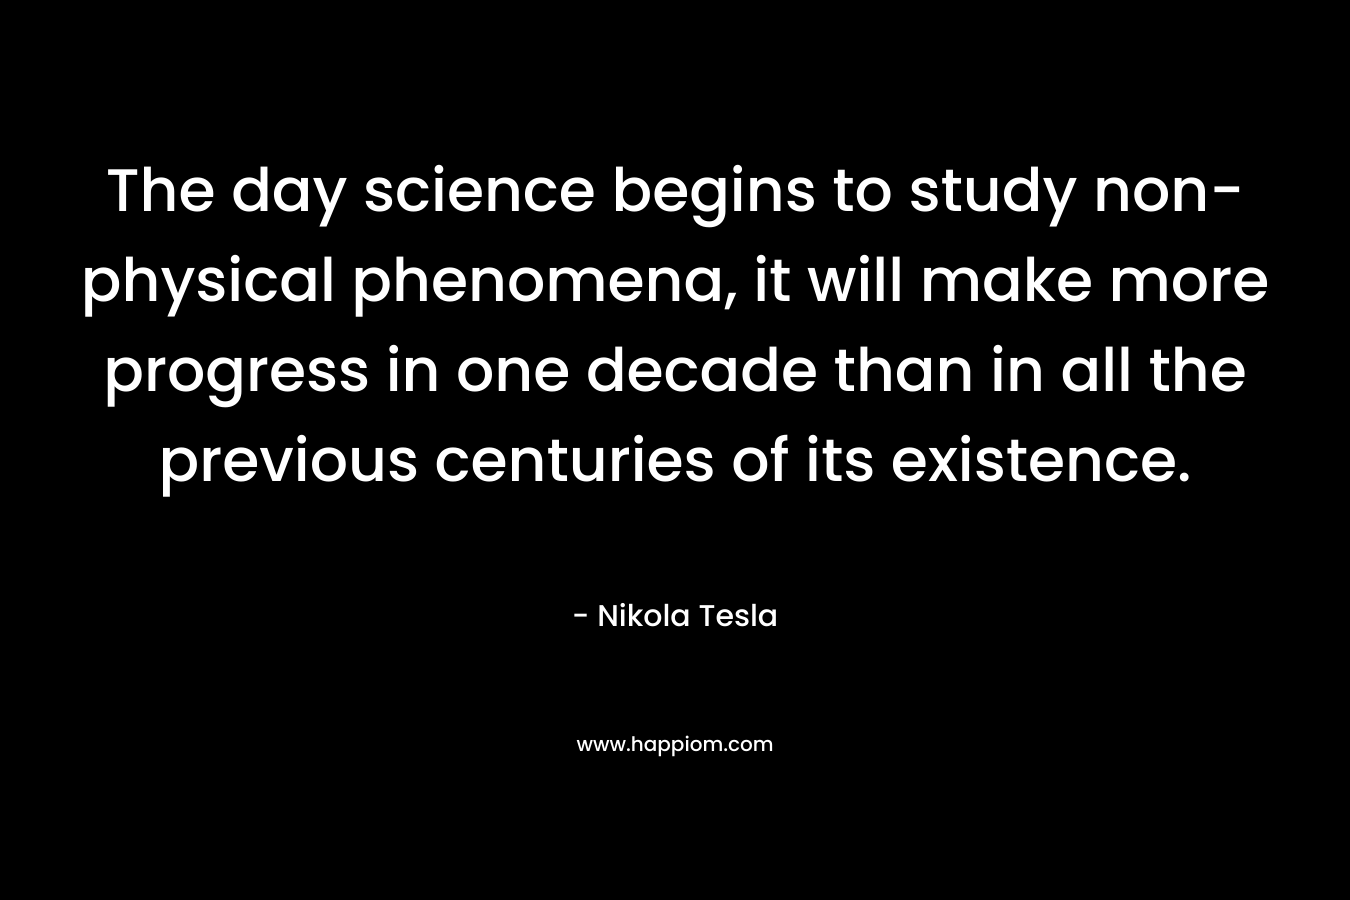 The day science begins to study non-physical phenomena, it will make more progress in one decade than in all the previous centuries of its existence. – Nikola Tesla